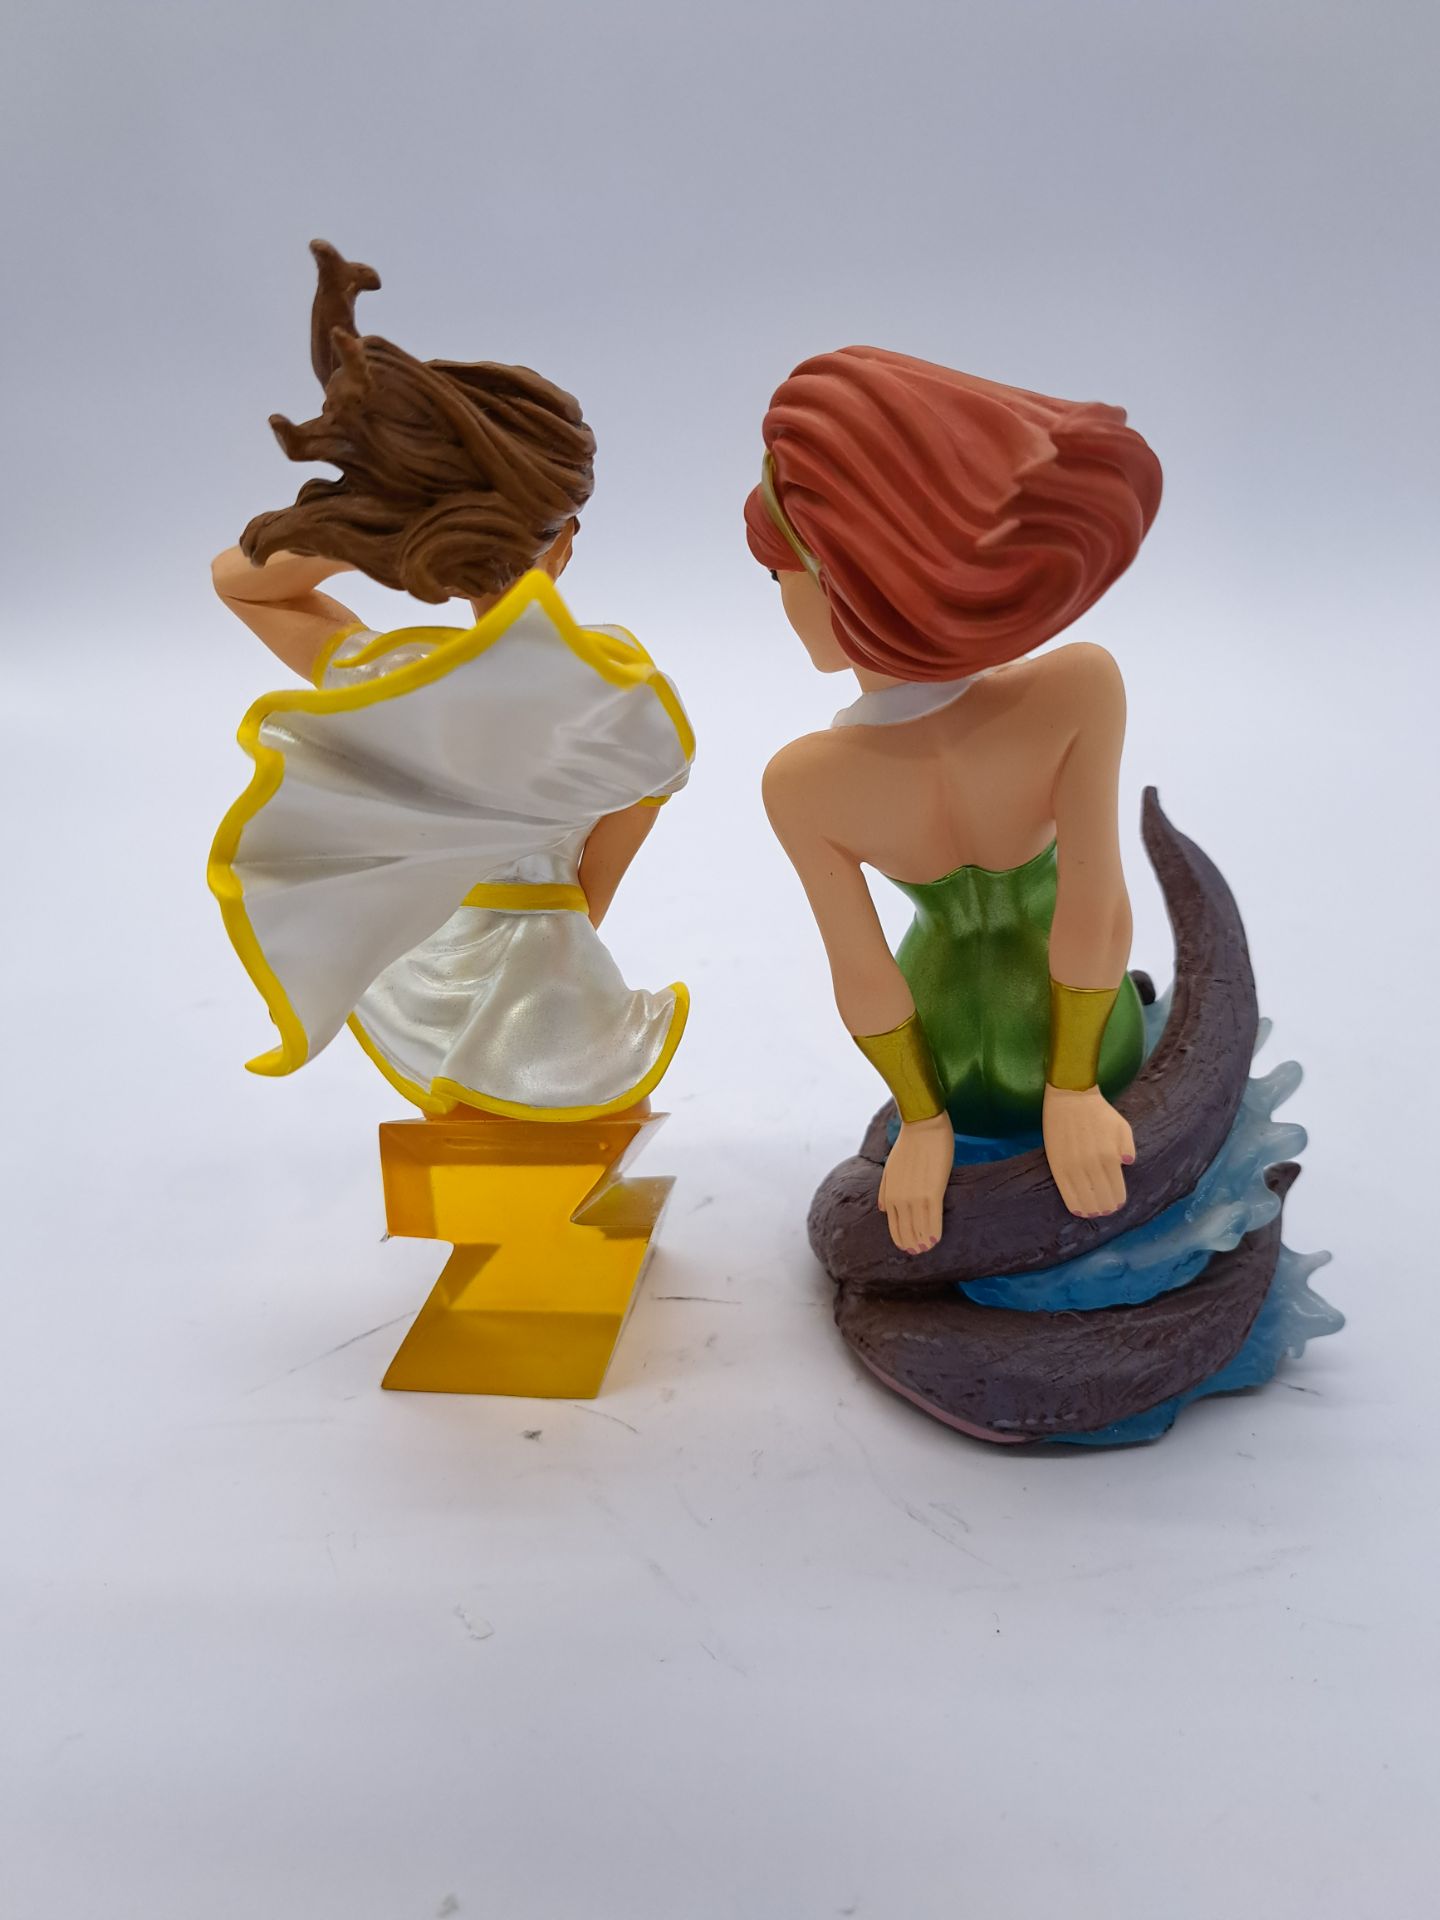 Women of the DC Universe Series 2 Mera Bust 0442 of 3000 & Shazam! Mary Bust 1701 of 3100 by DC D... - Bild 2 aus 3